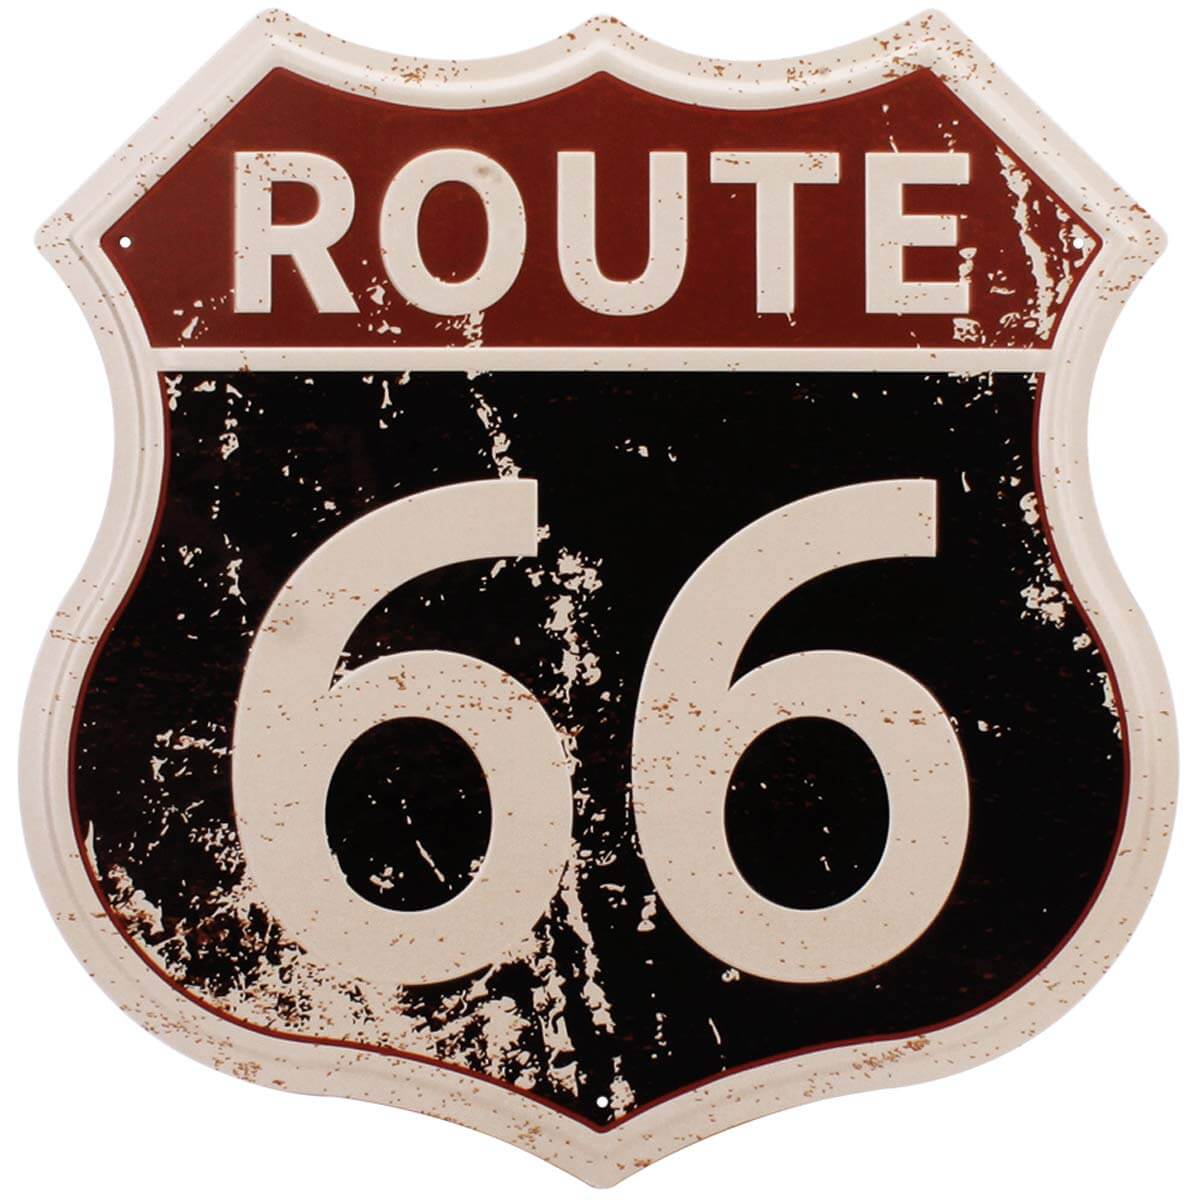 Route 66 Highway Road Sign